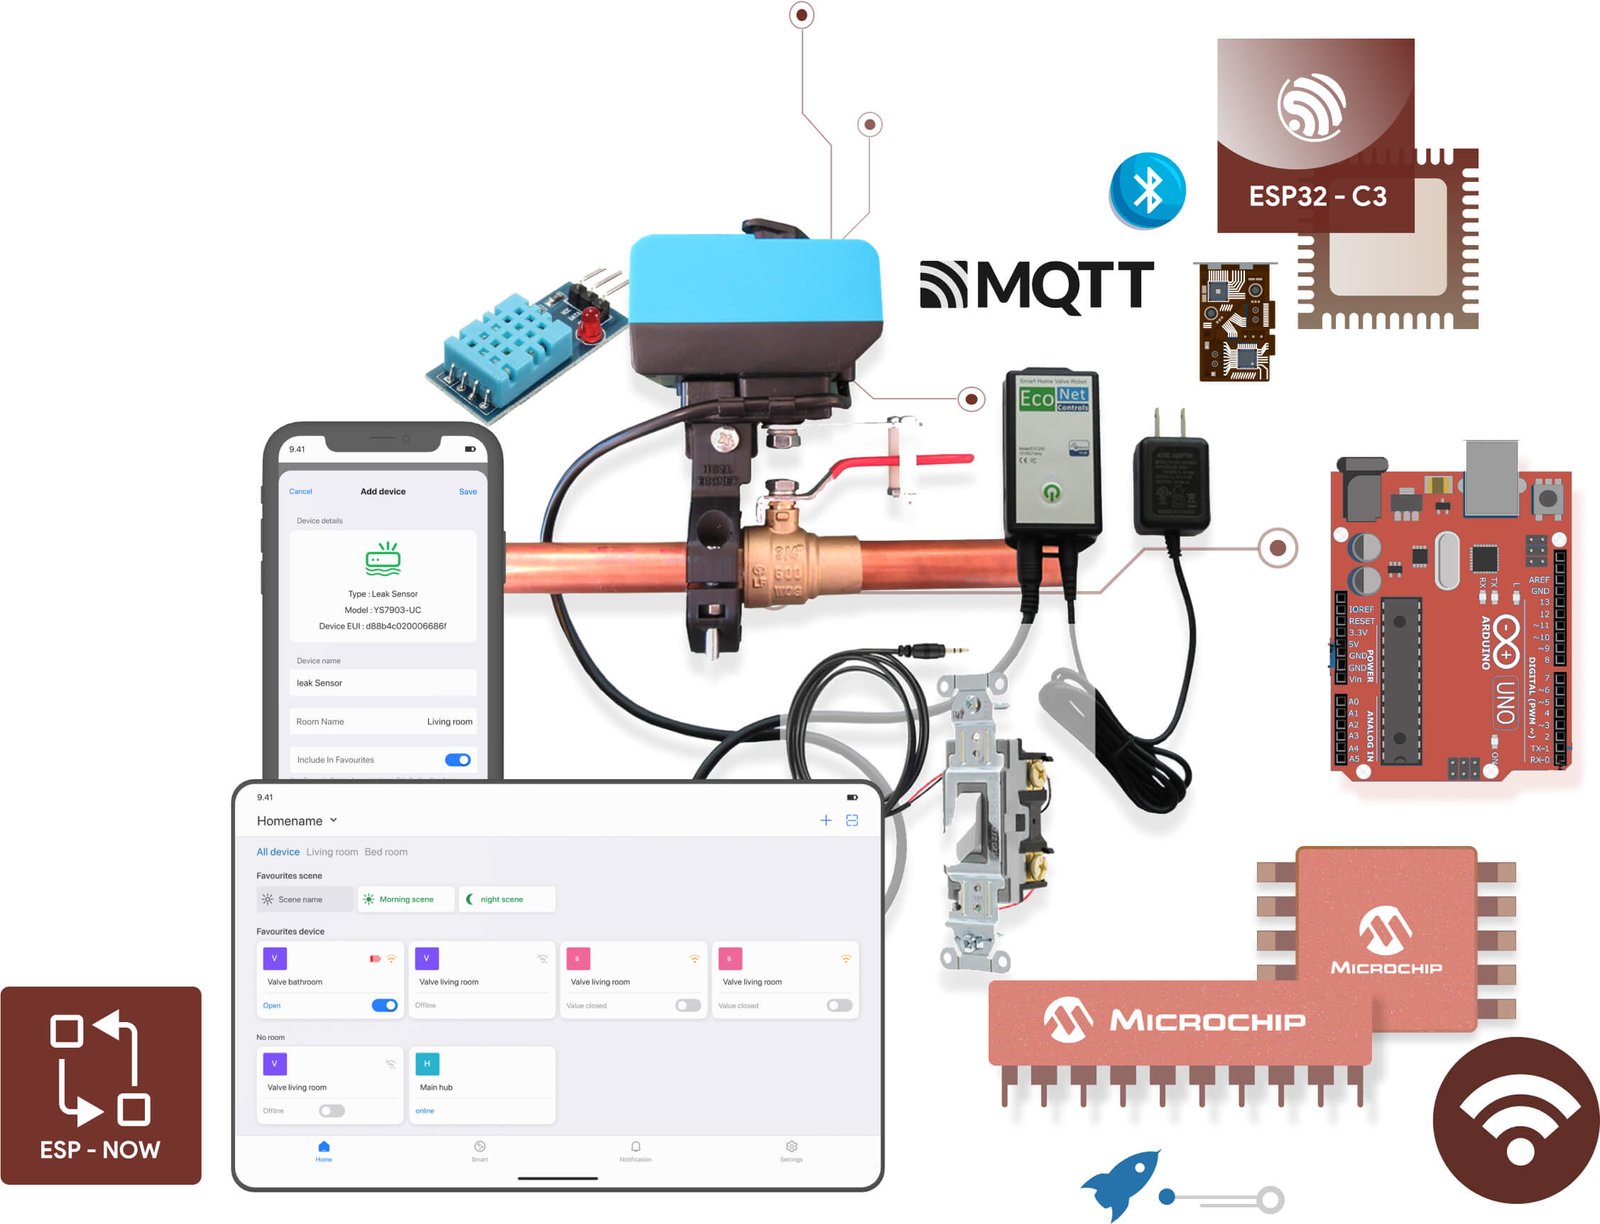 Smart Home Leakage Prevention system that integrates leak sensors, valve controllers into mobile app to control water wastage in large buildings, apartments and offices.